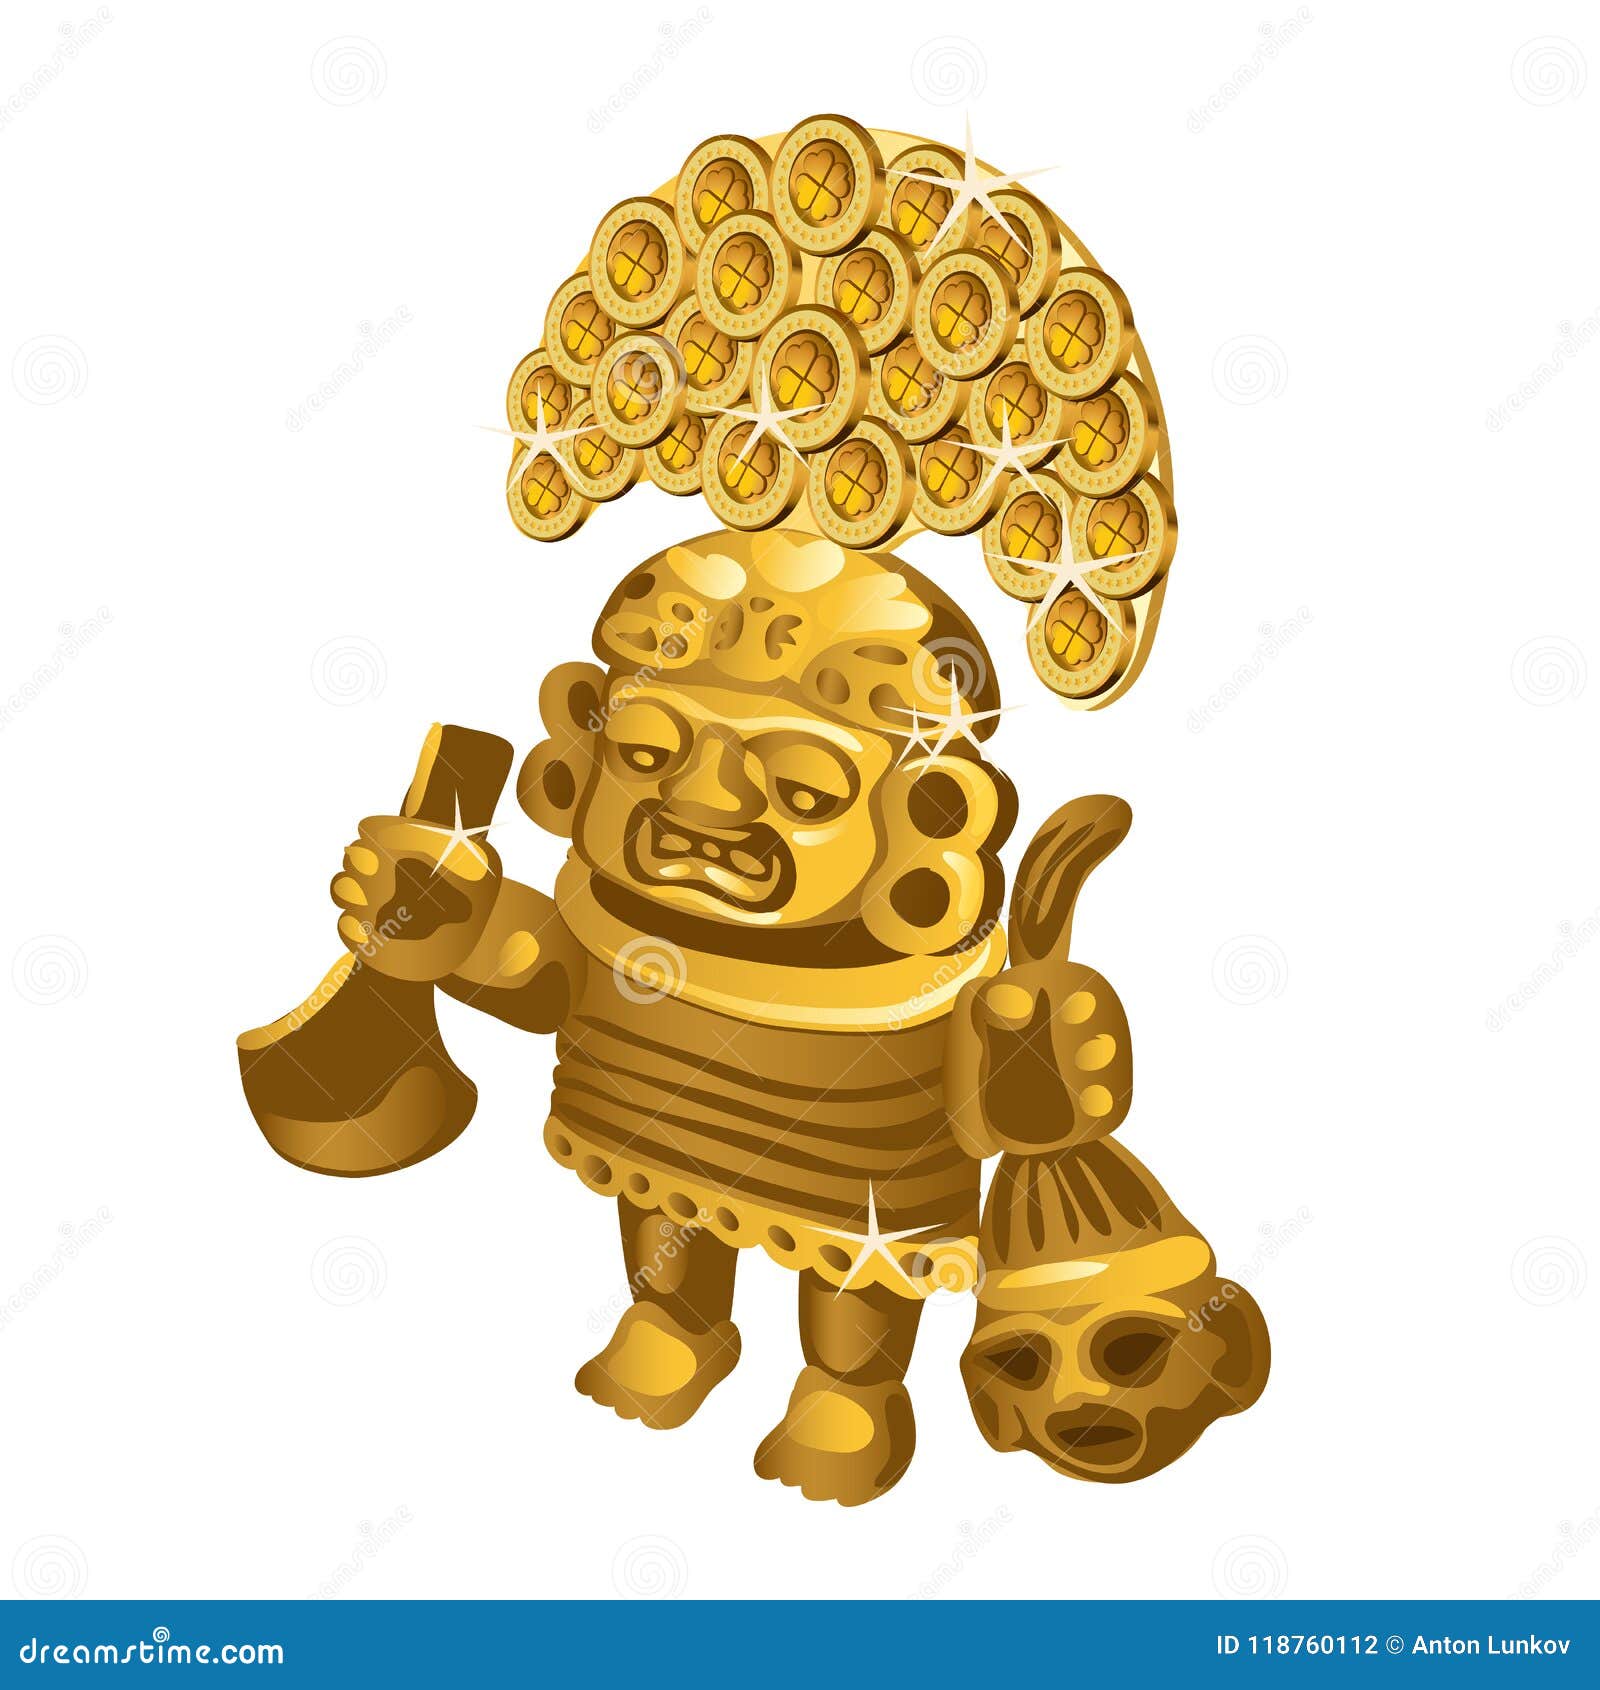 inca indian ritual figurine from gold, a  of sacrifice is on a white background.  .